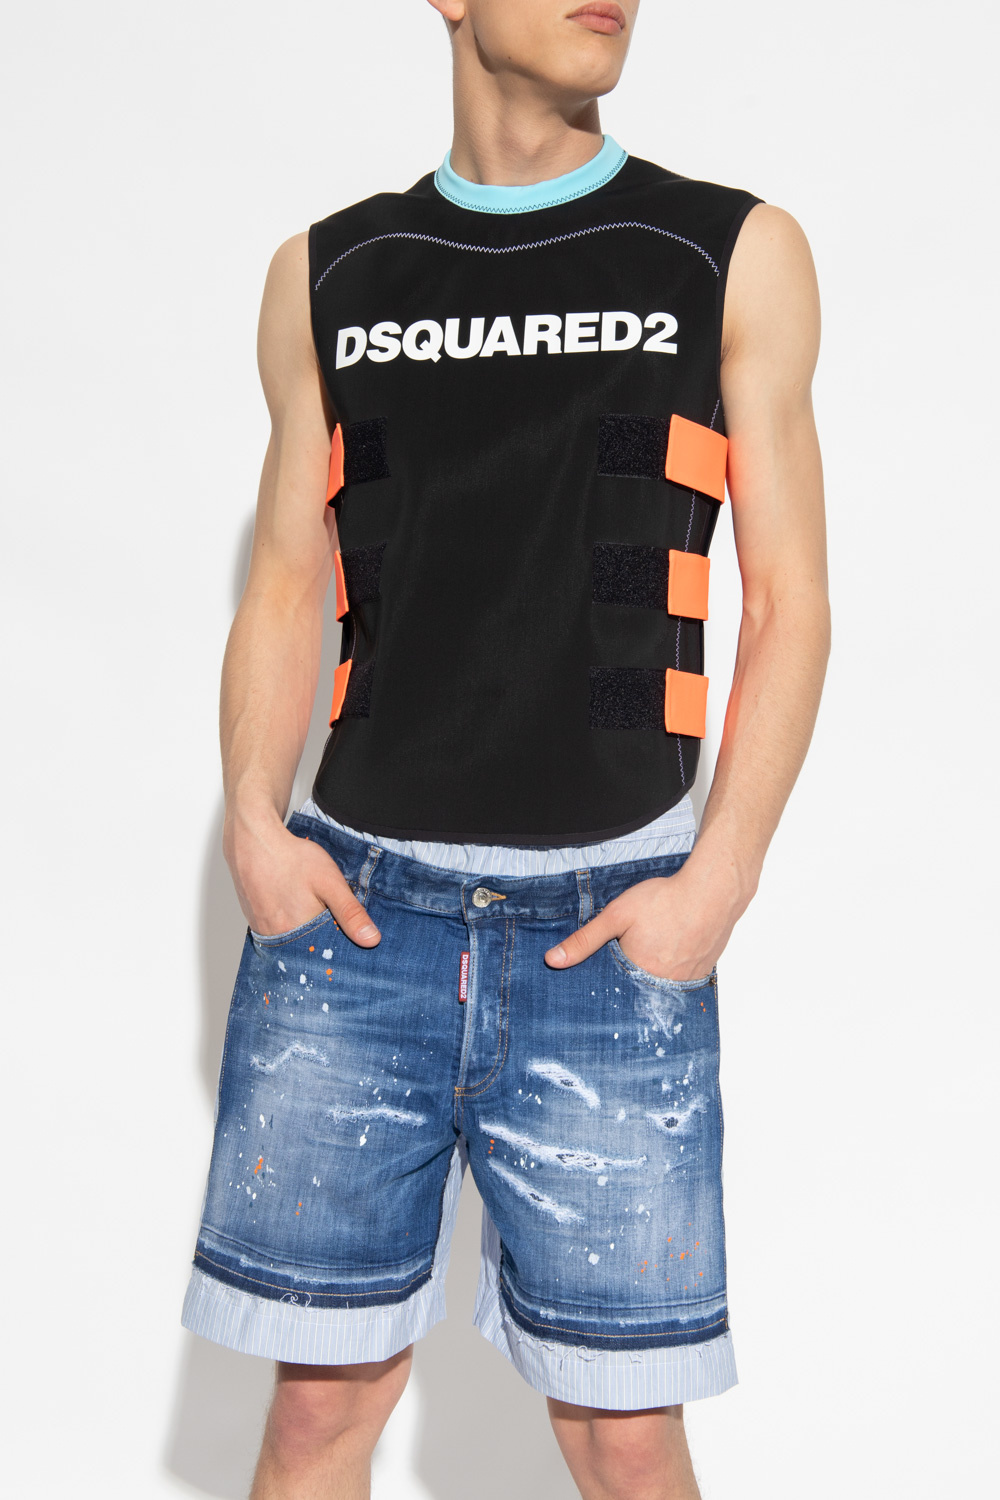 Dsquared2 Lets keep in touch